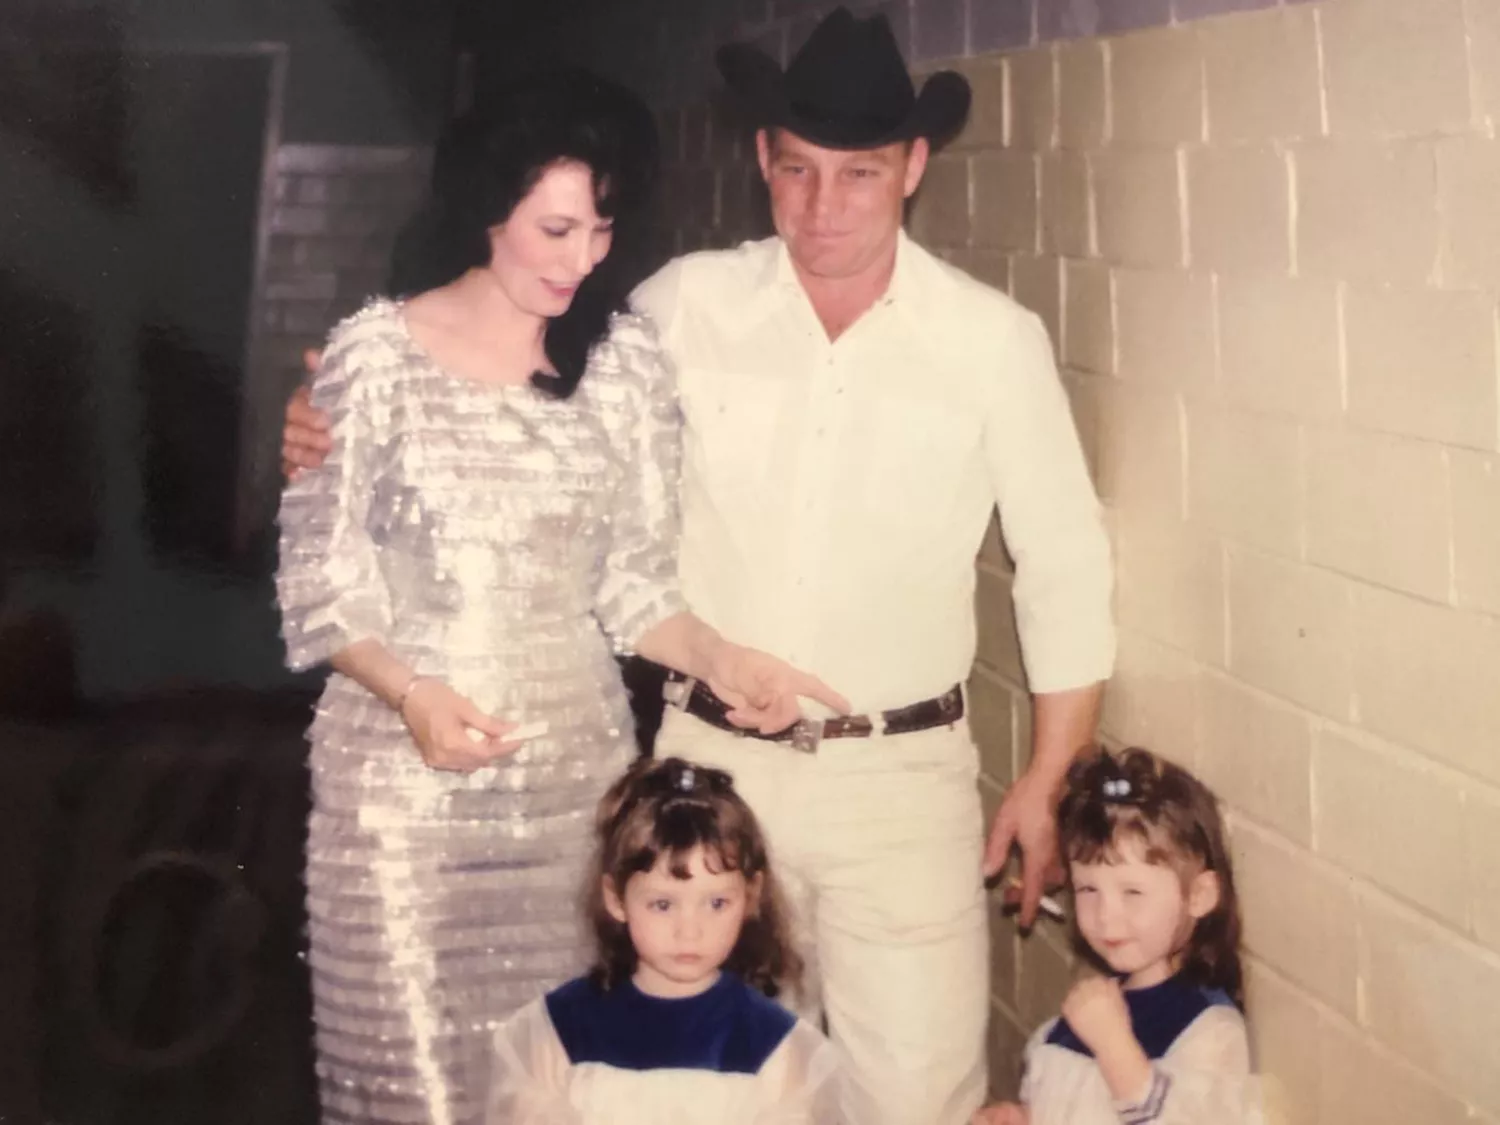 Loretta Lyn and Oliver "Doolittle" Lynn with their twin daughters Peggy and Patsy